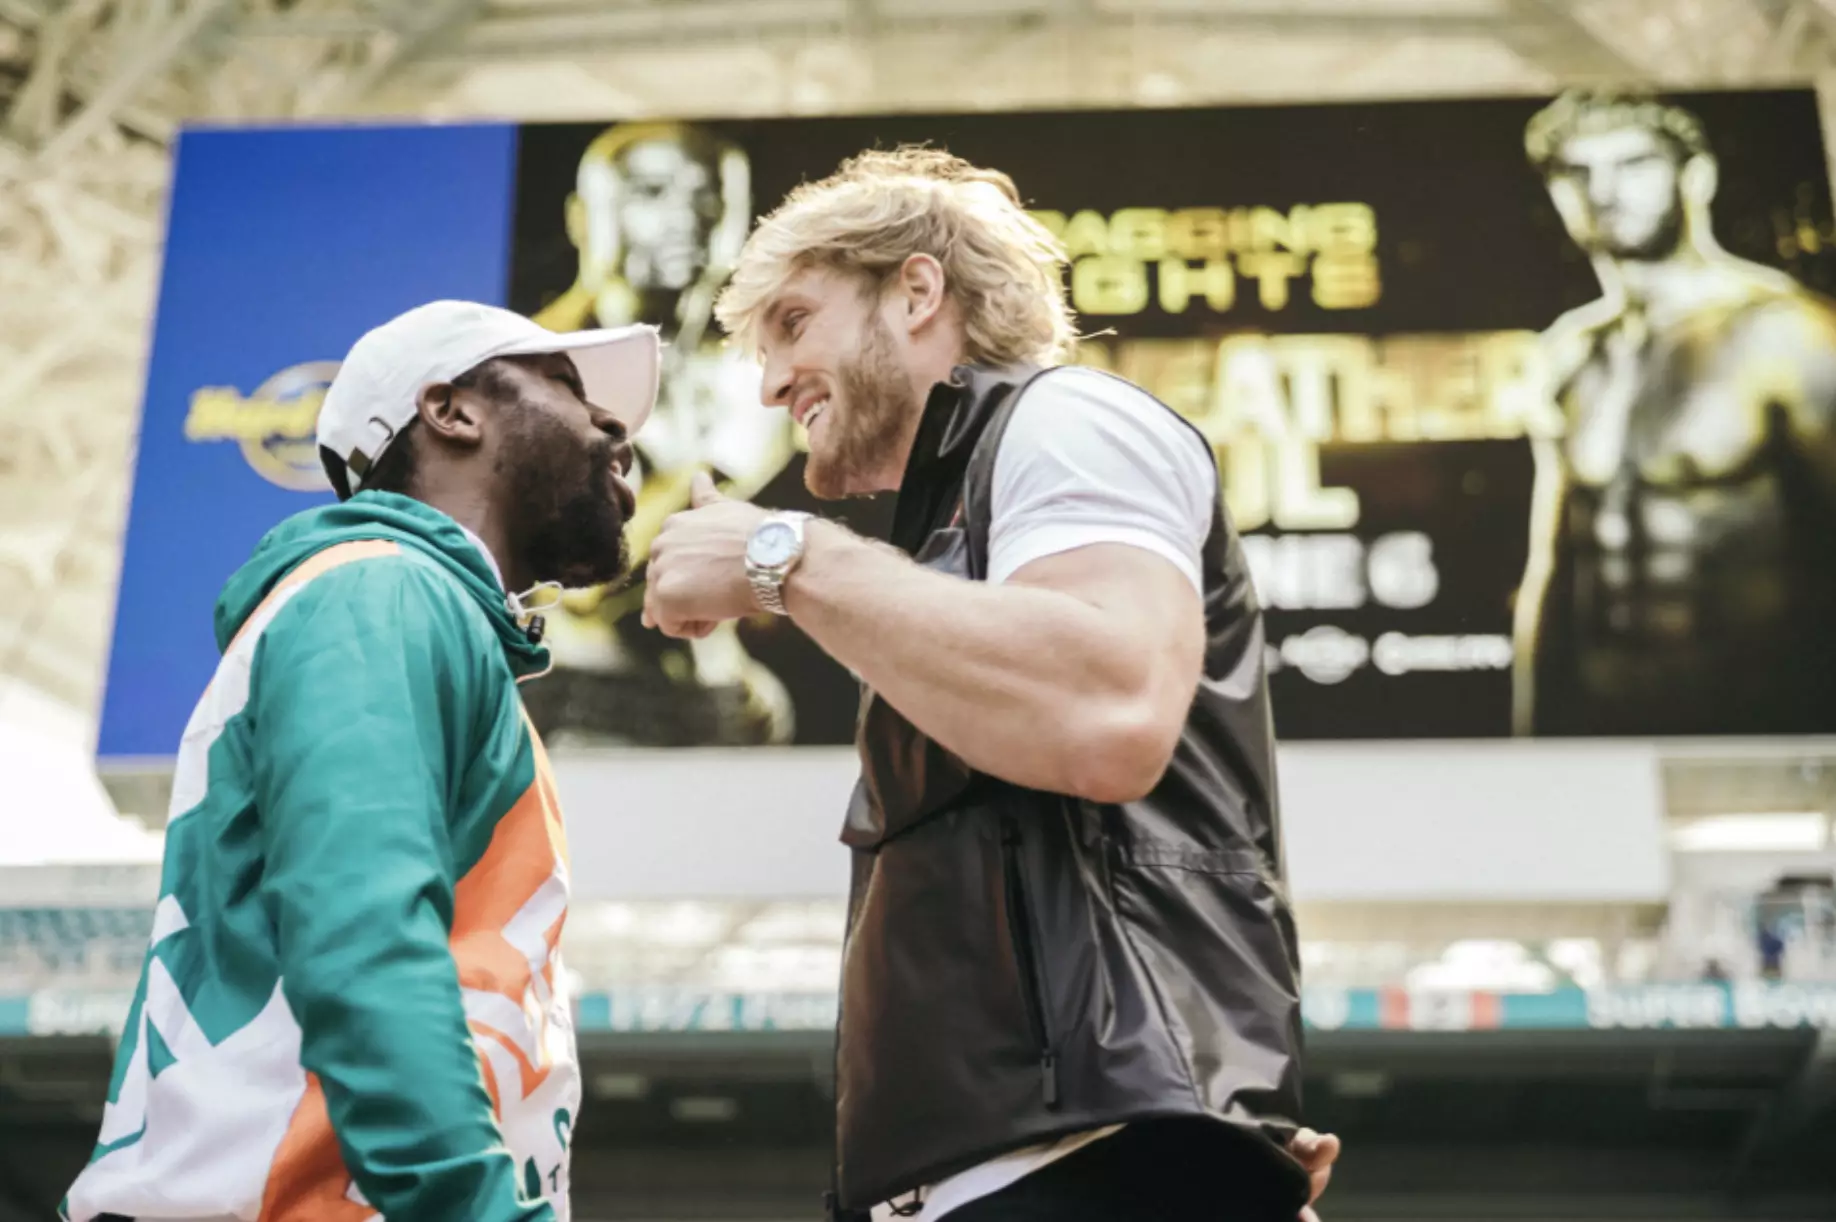 Fans in the UK will be dying to see what happens when Floyd Mayweather takes on Logan Paul